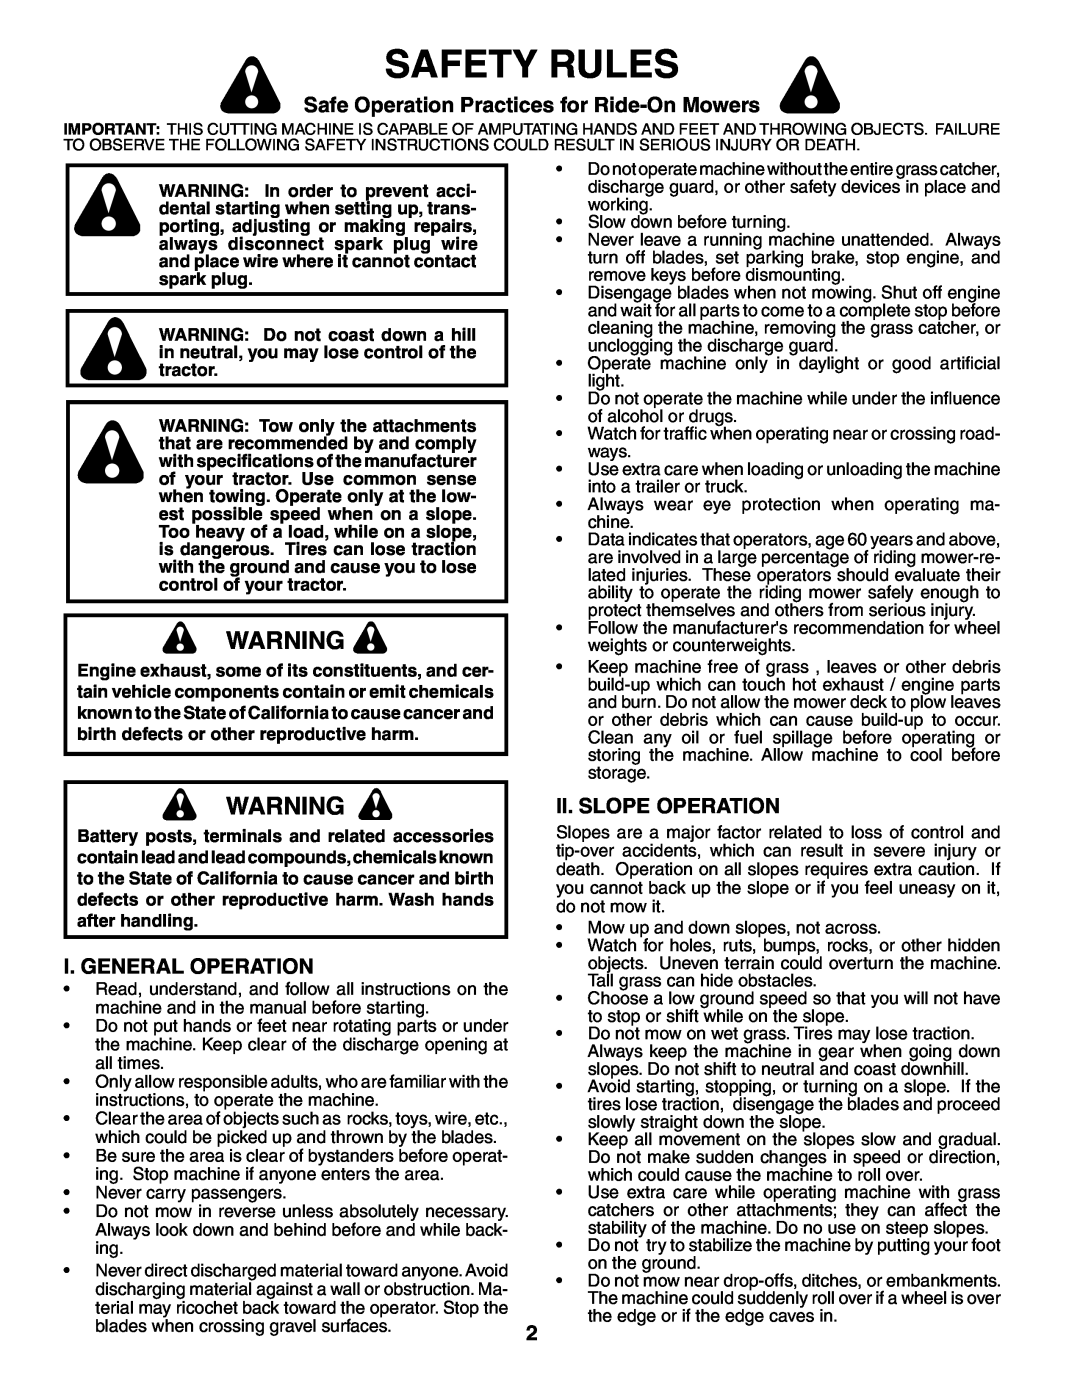 Poulan 195620 manual Safety Rules, Safe Operation Practices for Ride-On Mowers, I. General Operation, Ii. Slope Operation 